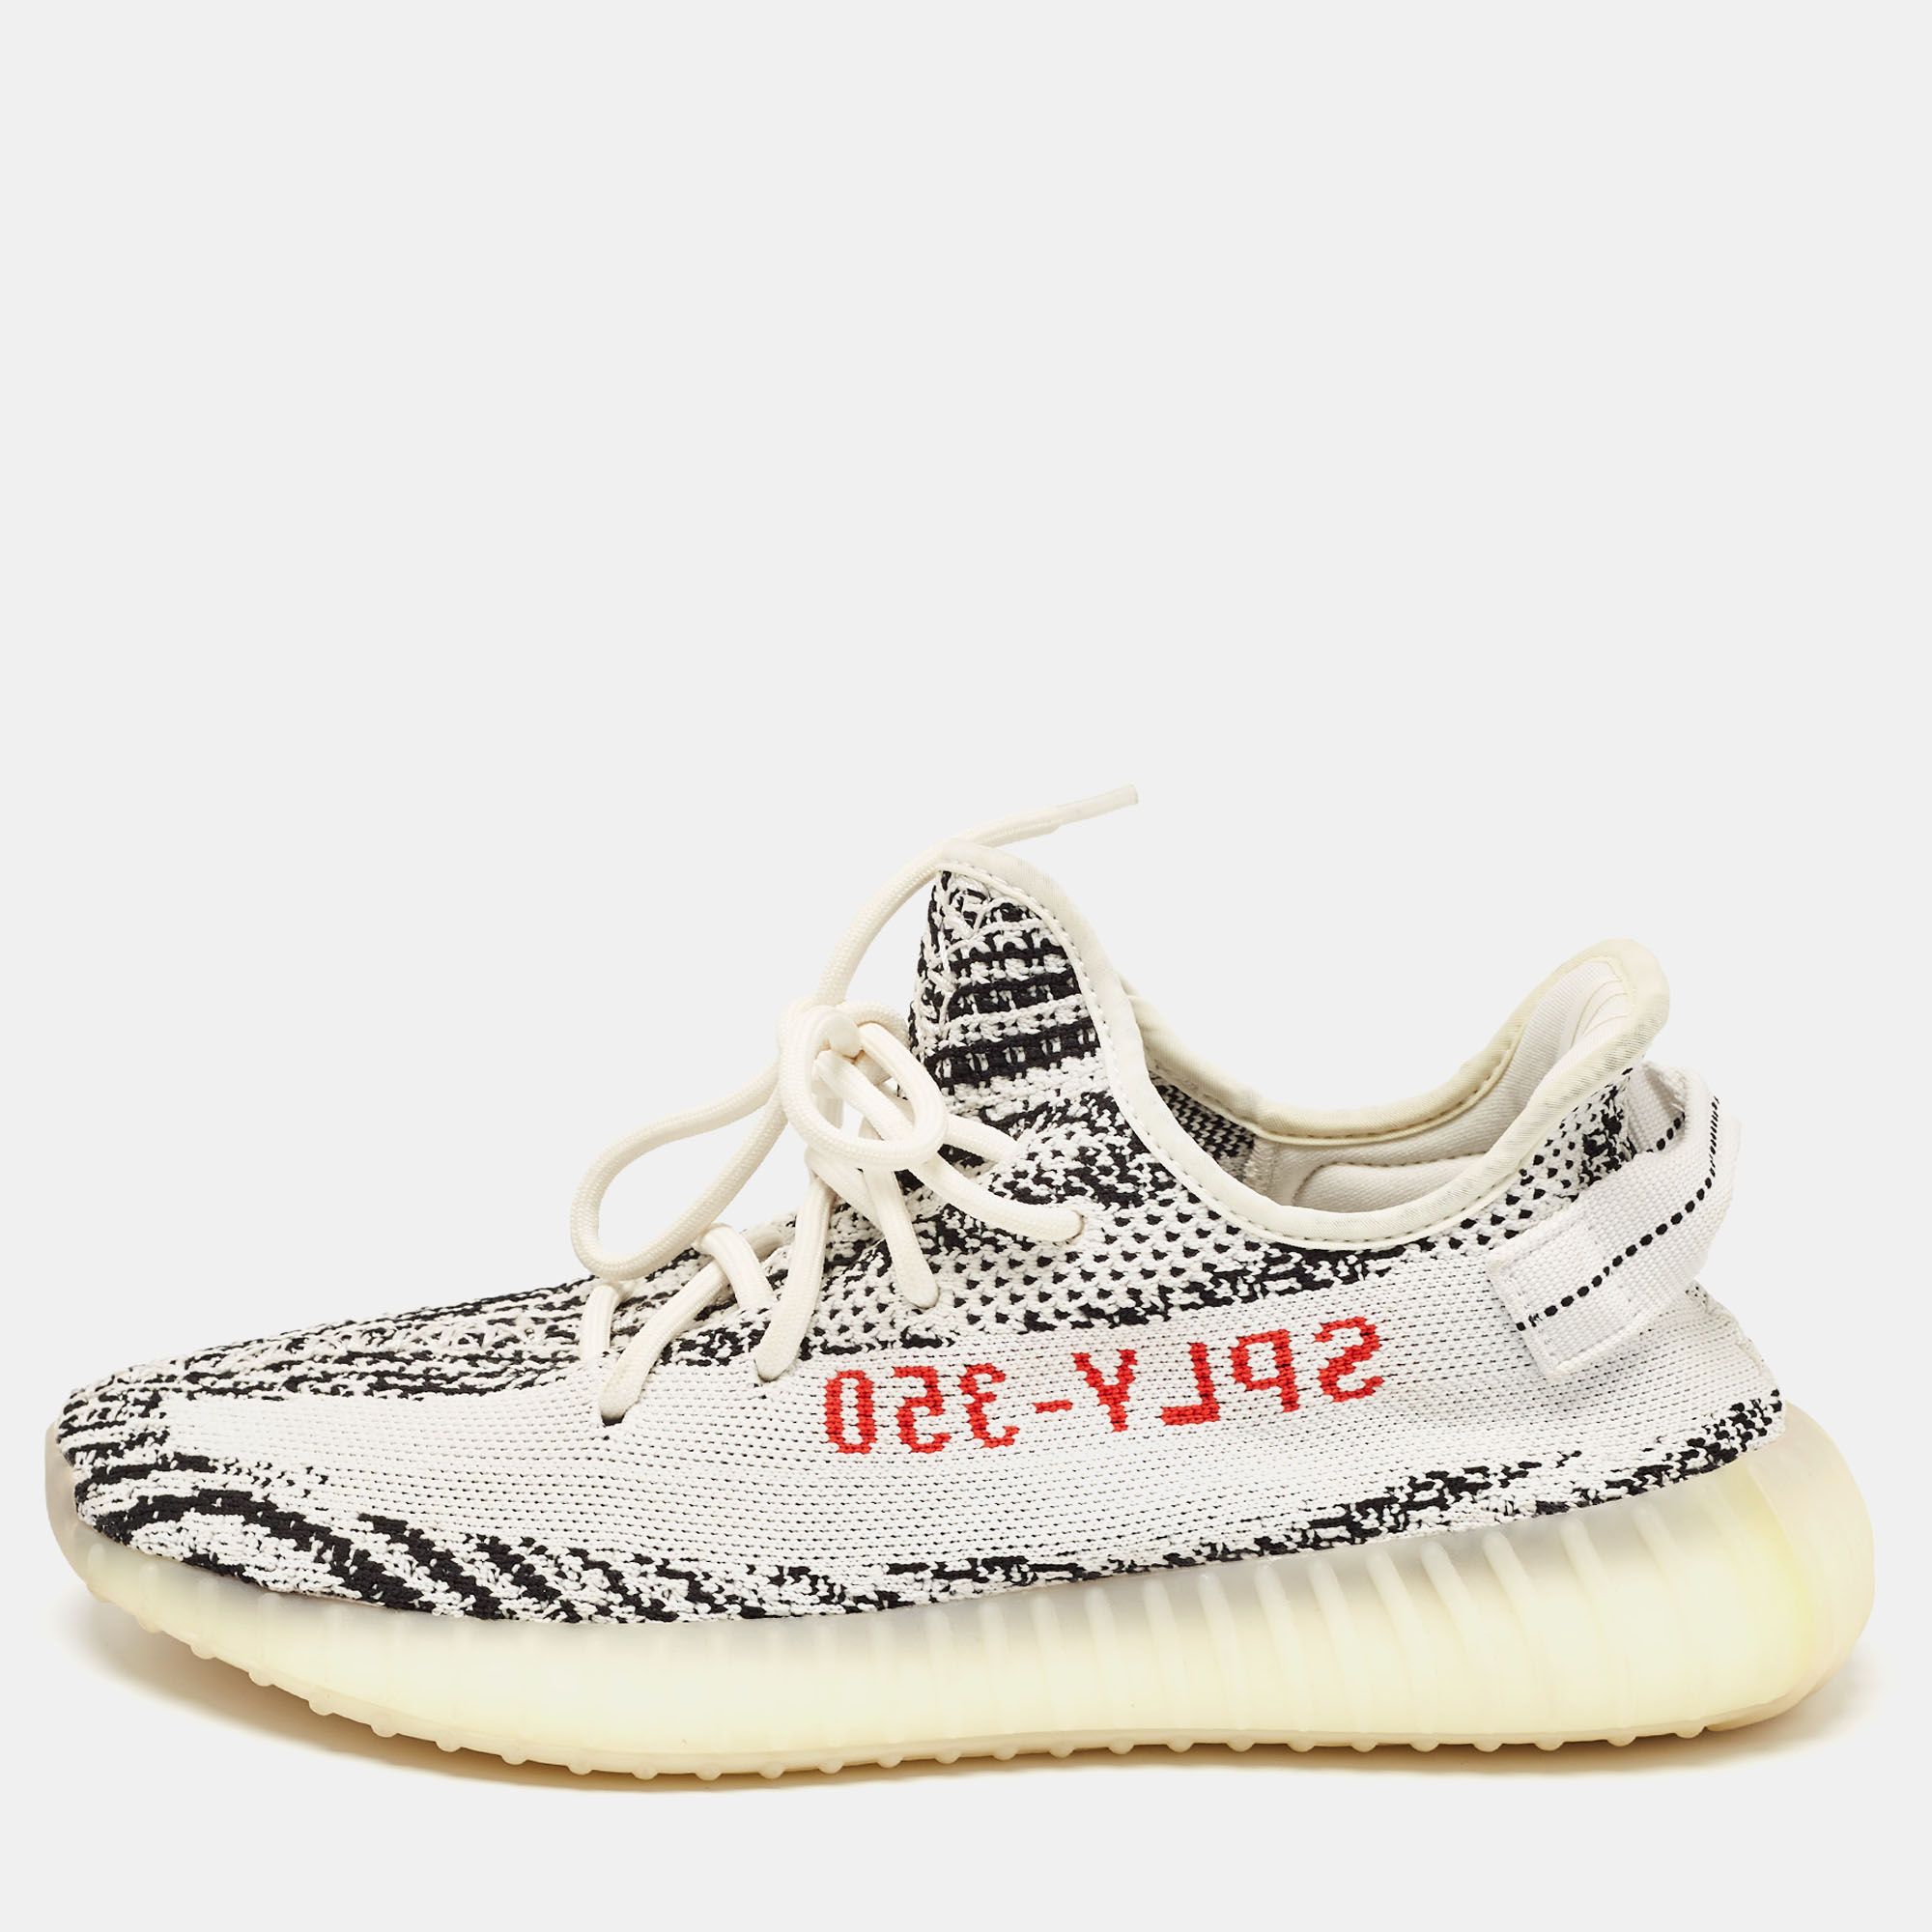 Pre-owned Yeezy X Adidas White/black Knit Fabric Boost 350 V2 Zebra Sneakers Size 43 1/3